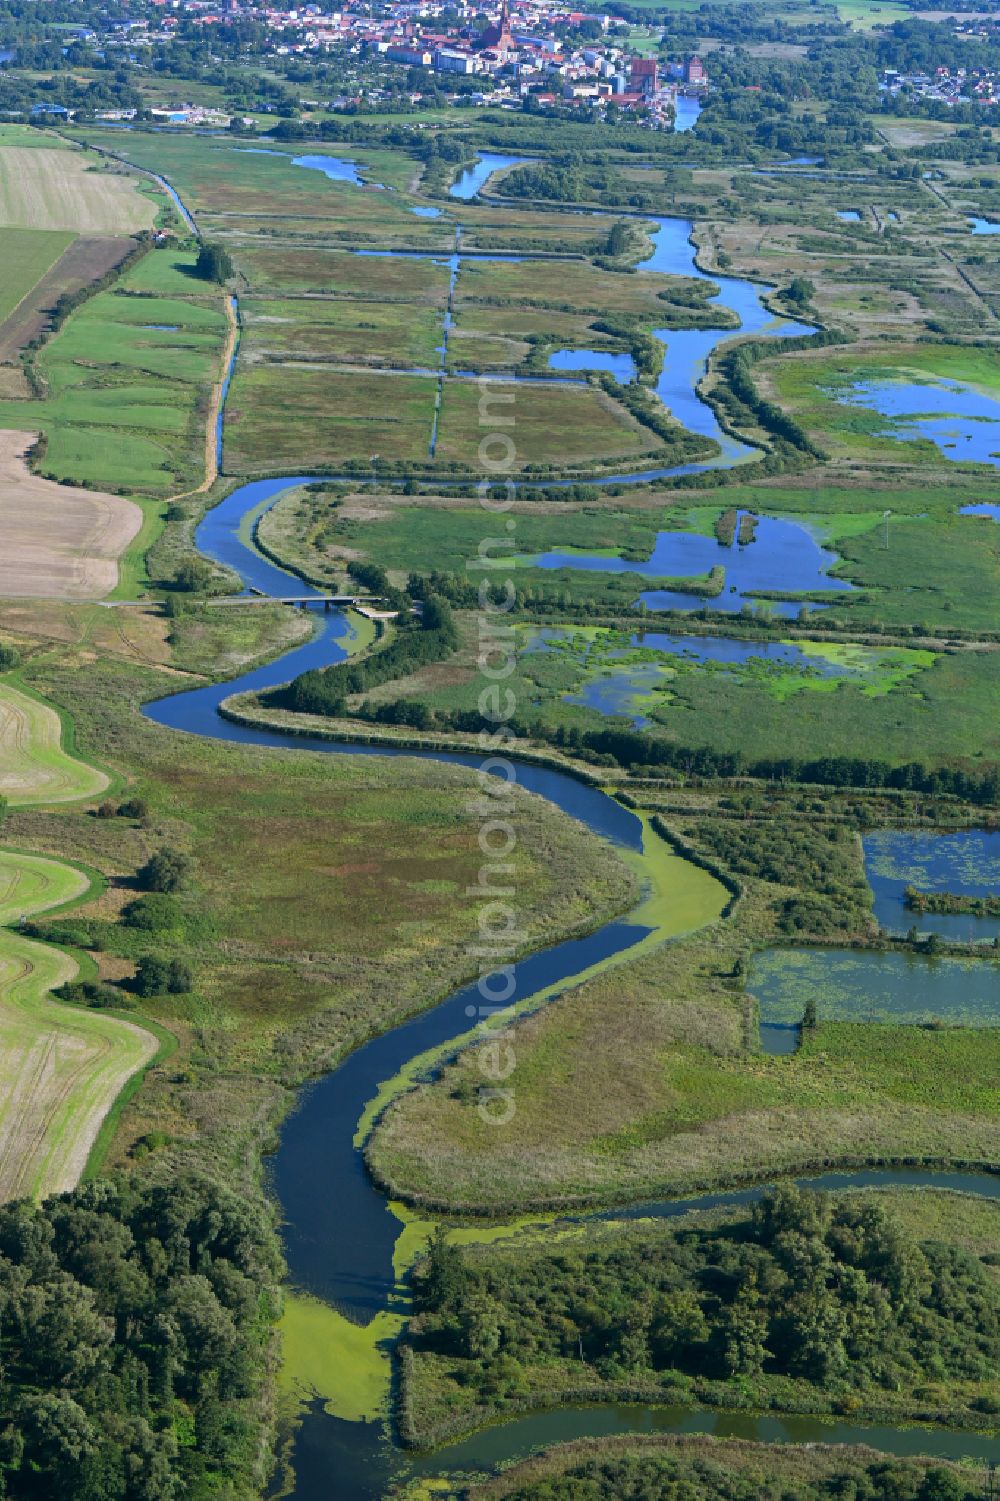 Aerial image Wotenick - Curved loop of the riparian zones on the course of the river Trebel in Wotenick in the state Mecklenburg - Western Pomerania, Germany